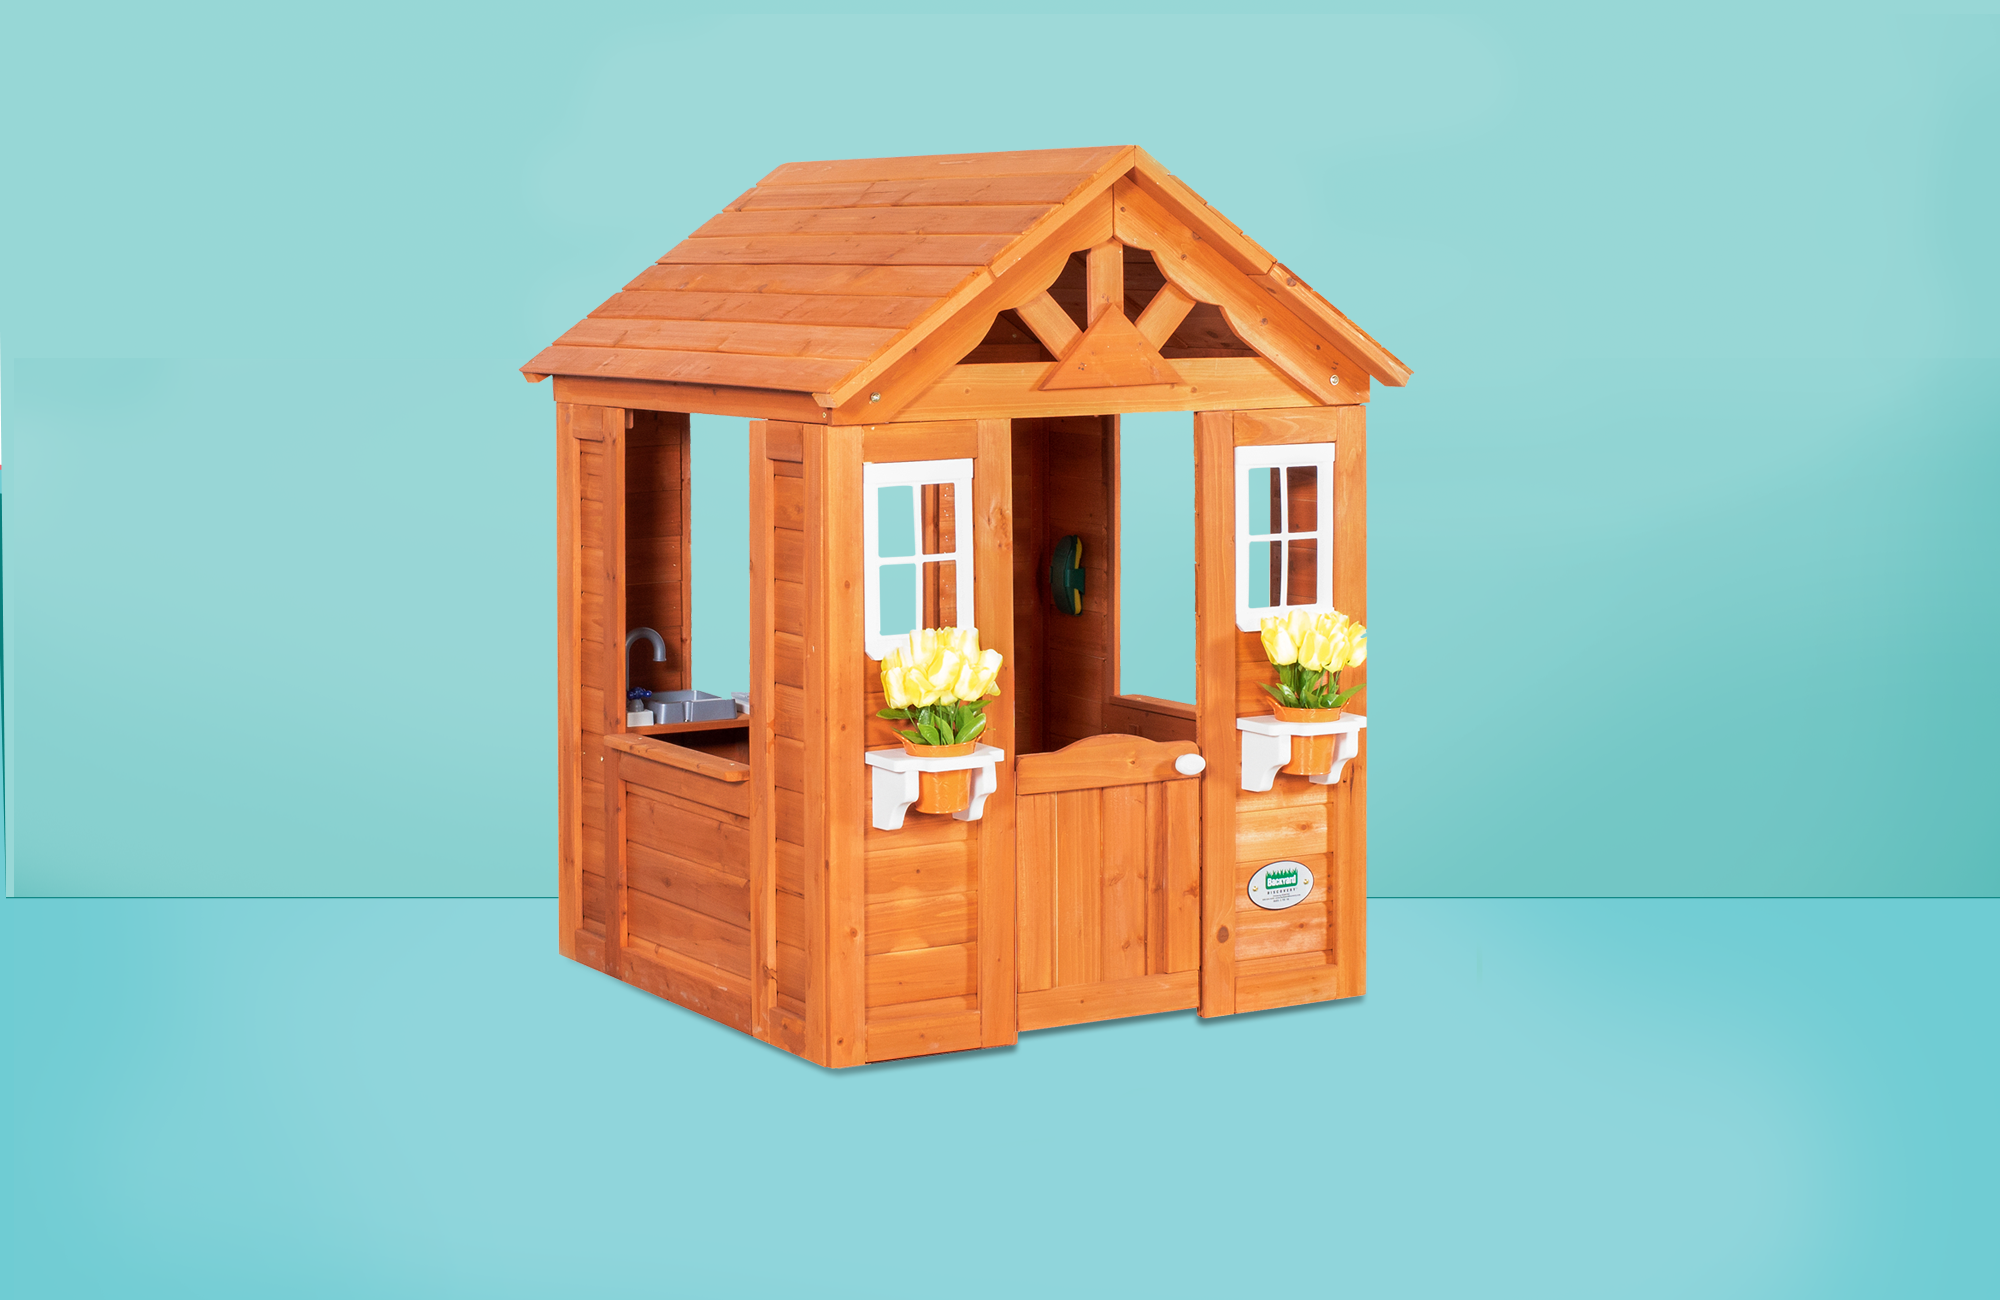 Sale > small wooden playhouse > in stock